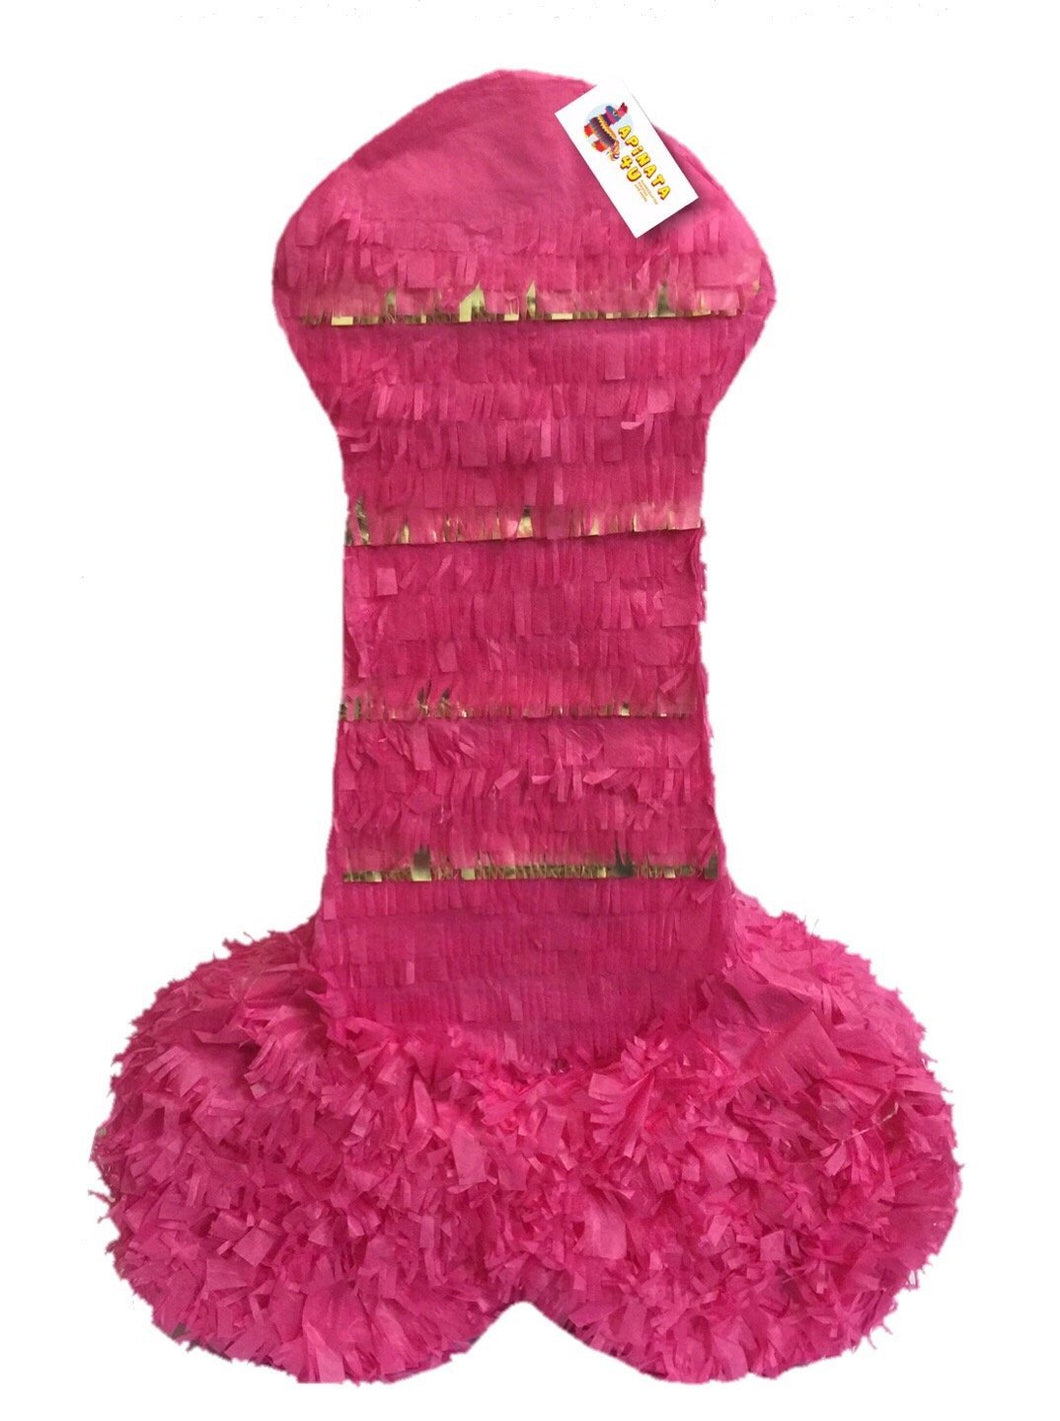 APINATA4U LLC - Penis Adult Pinata | Hot Pink | Ideal for Bachelorette Party | Made with High Quality Cardboard | for Fun, Party & Game | Size - 20'' Tall | Easy to Use & Fill